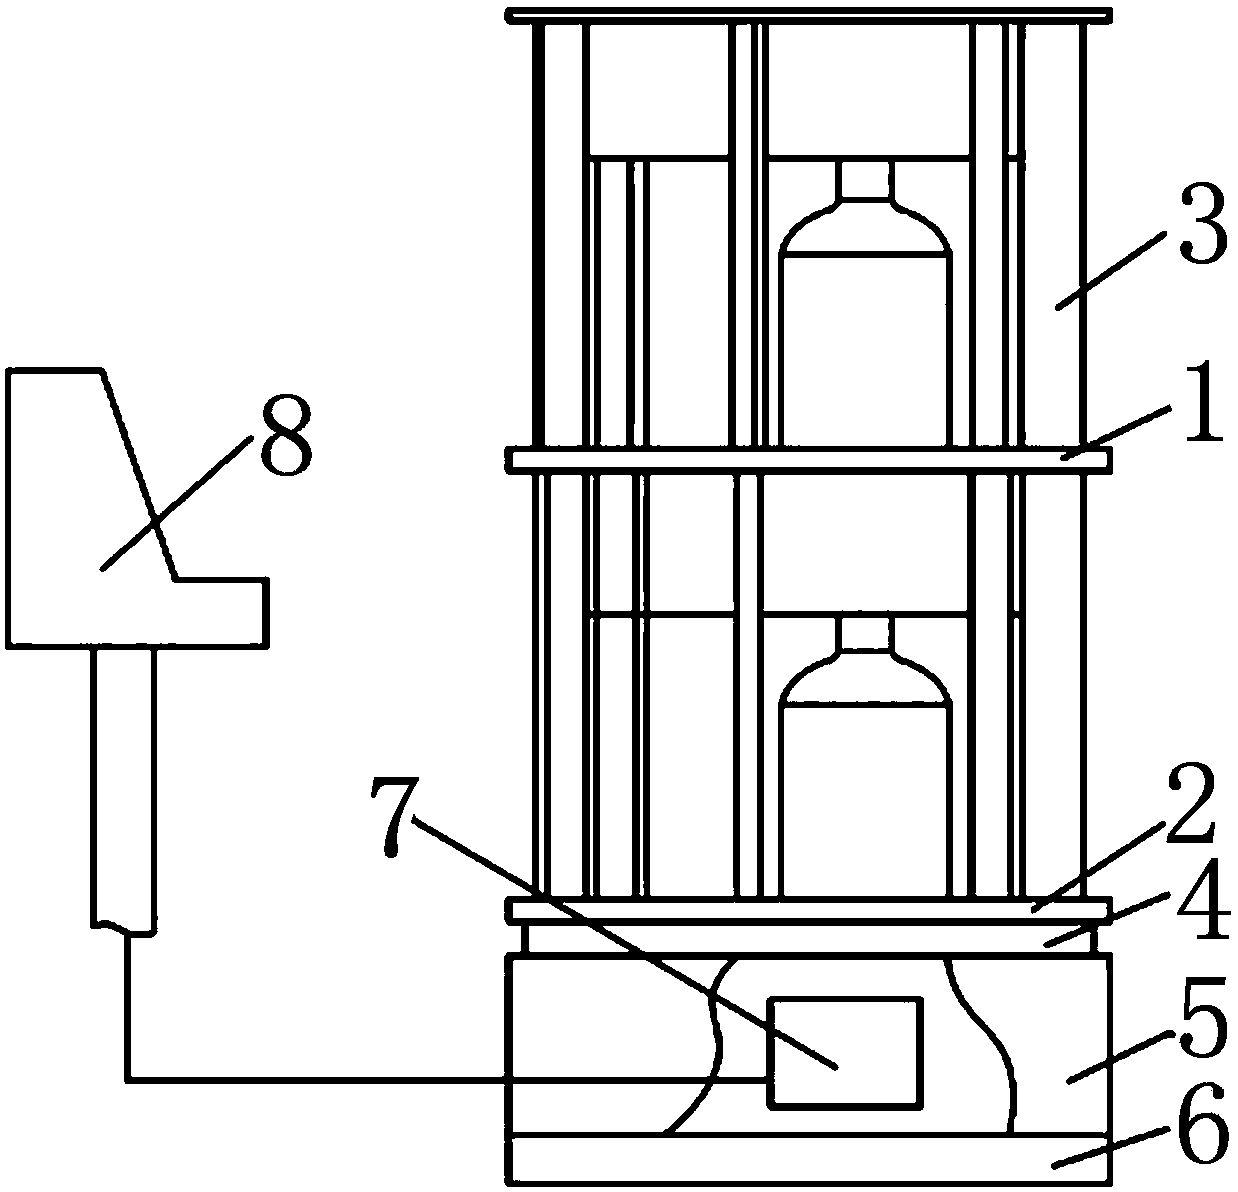 A liquid mixing method and device